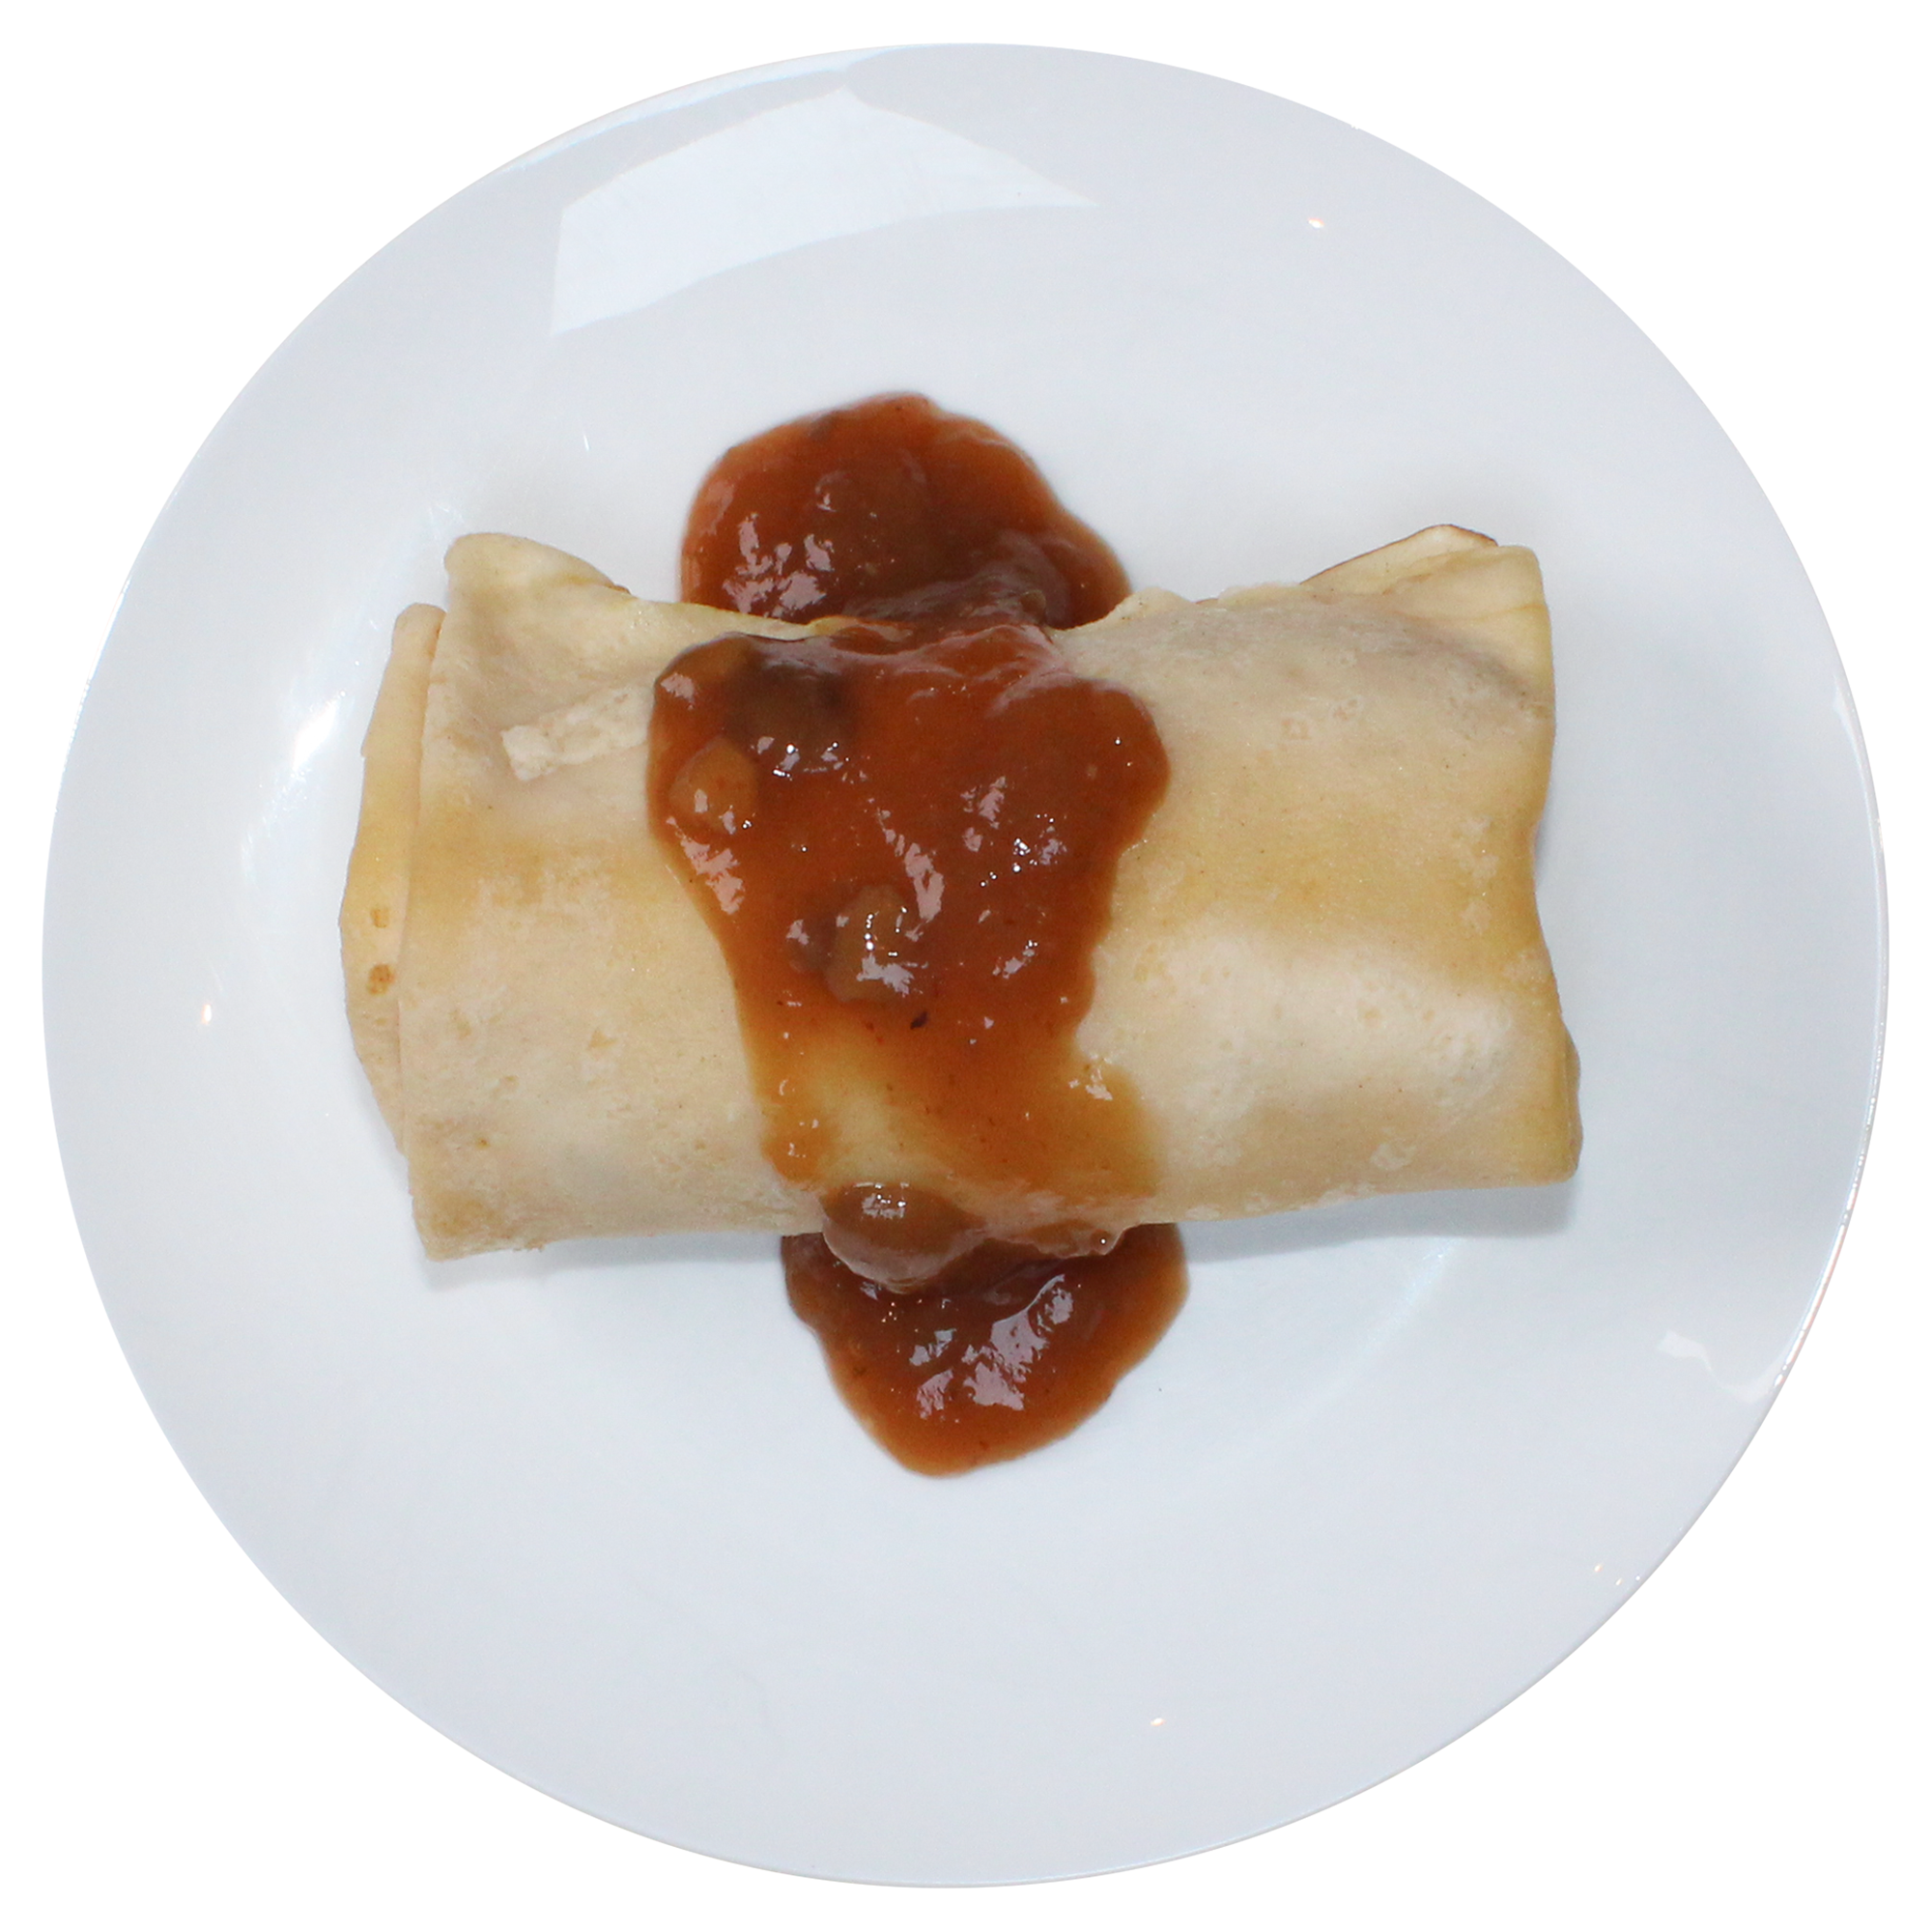 Liver Blintz with sauce